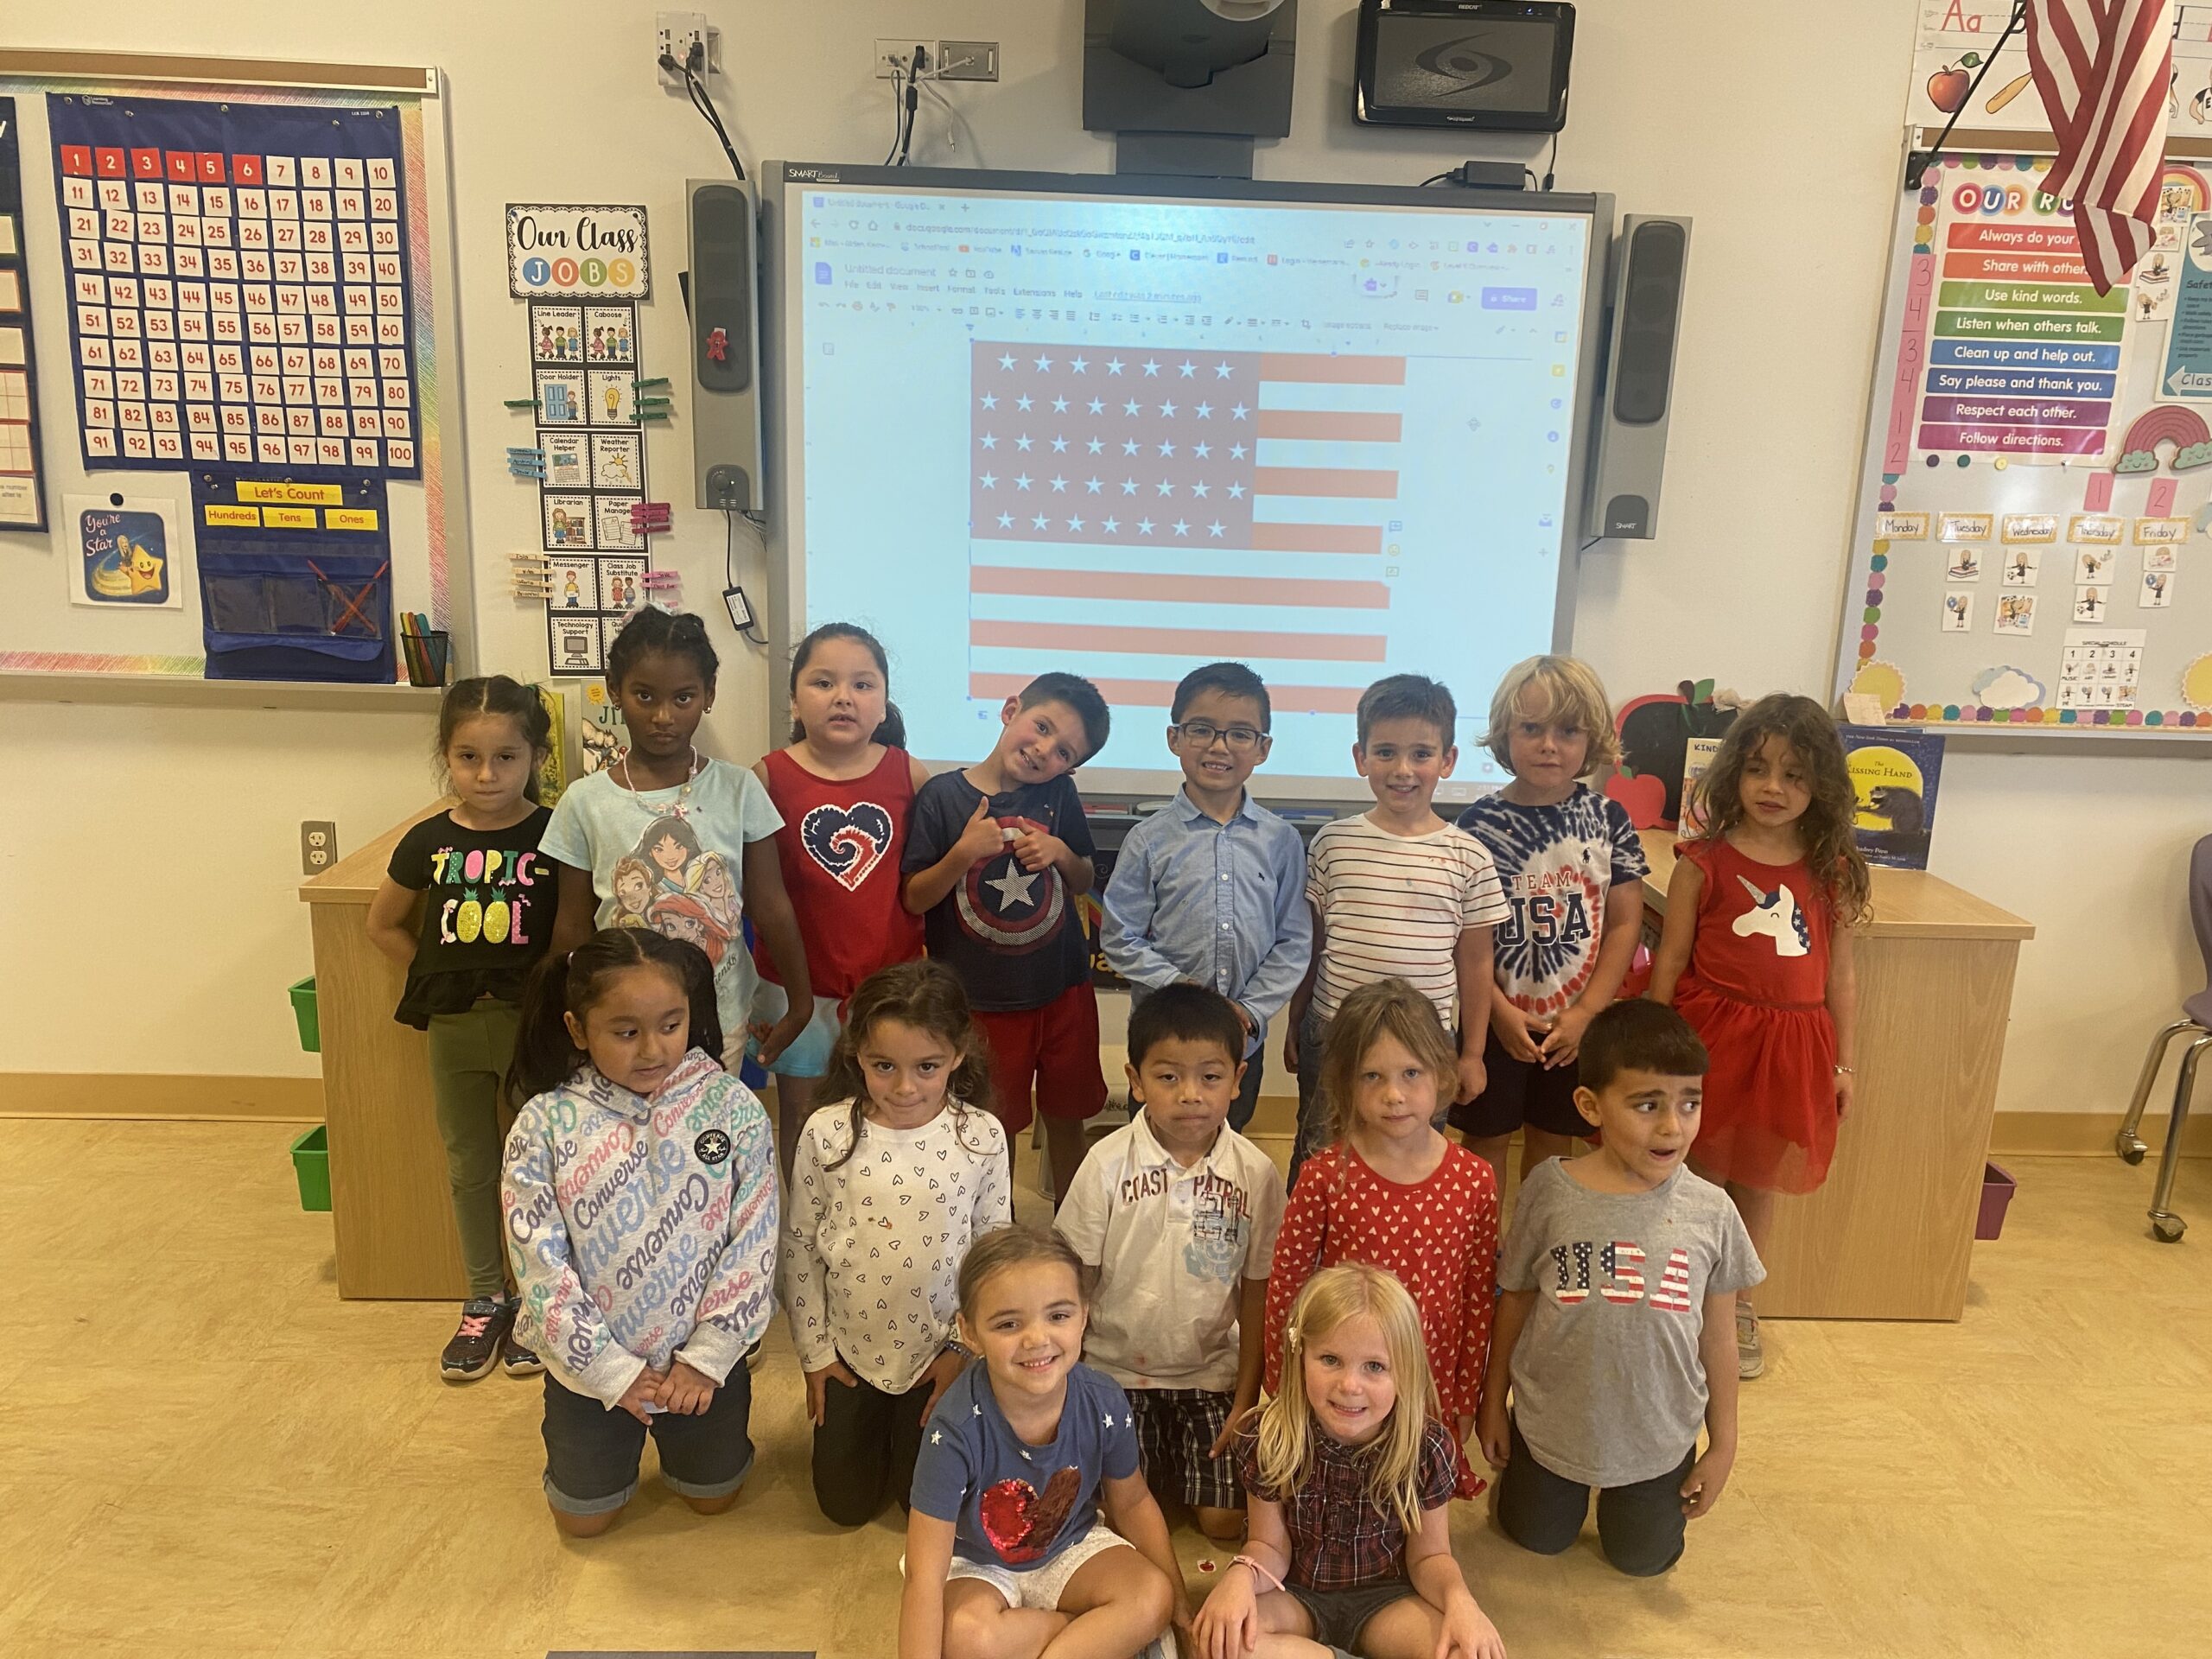 Eastport-South Manor Central School District kindergarten students enrolled at Tuttle Avenue Elementary School showed their patriotism on school days prior to and after September 11 by wearing patriotic colors. The students also discussed the definition and duties of a first responder and why they should always be thankful for their services. COURTESY EASTPORT-SOUTH MANOR SCHOOL DISTRICT